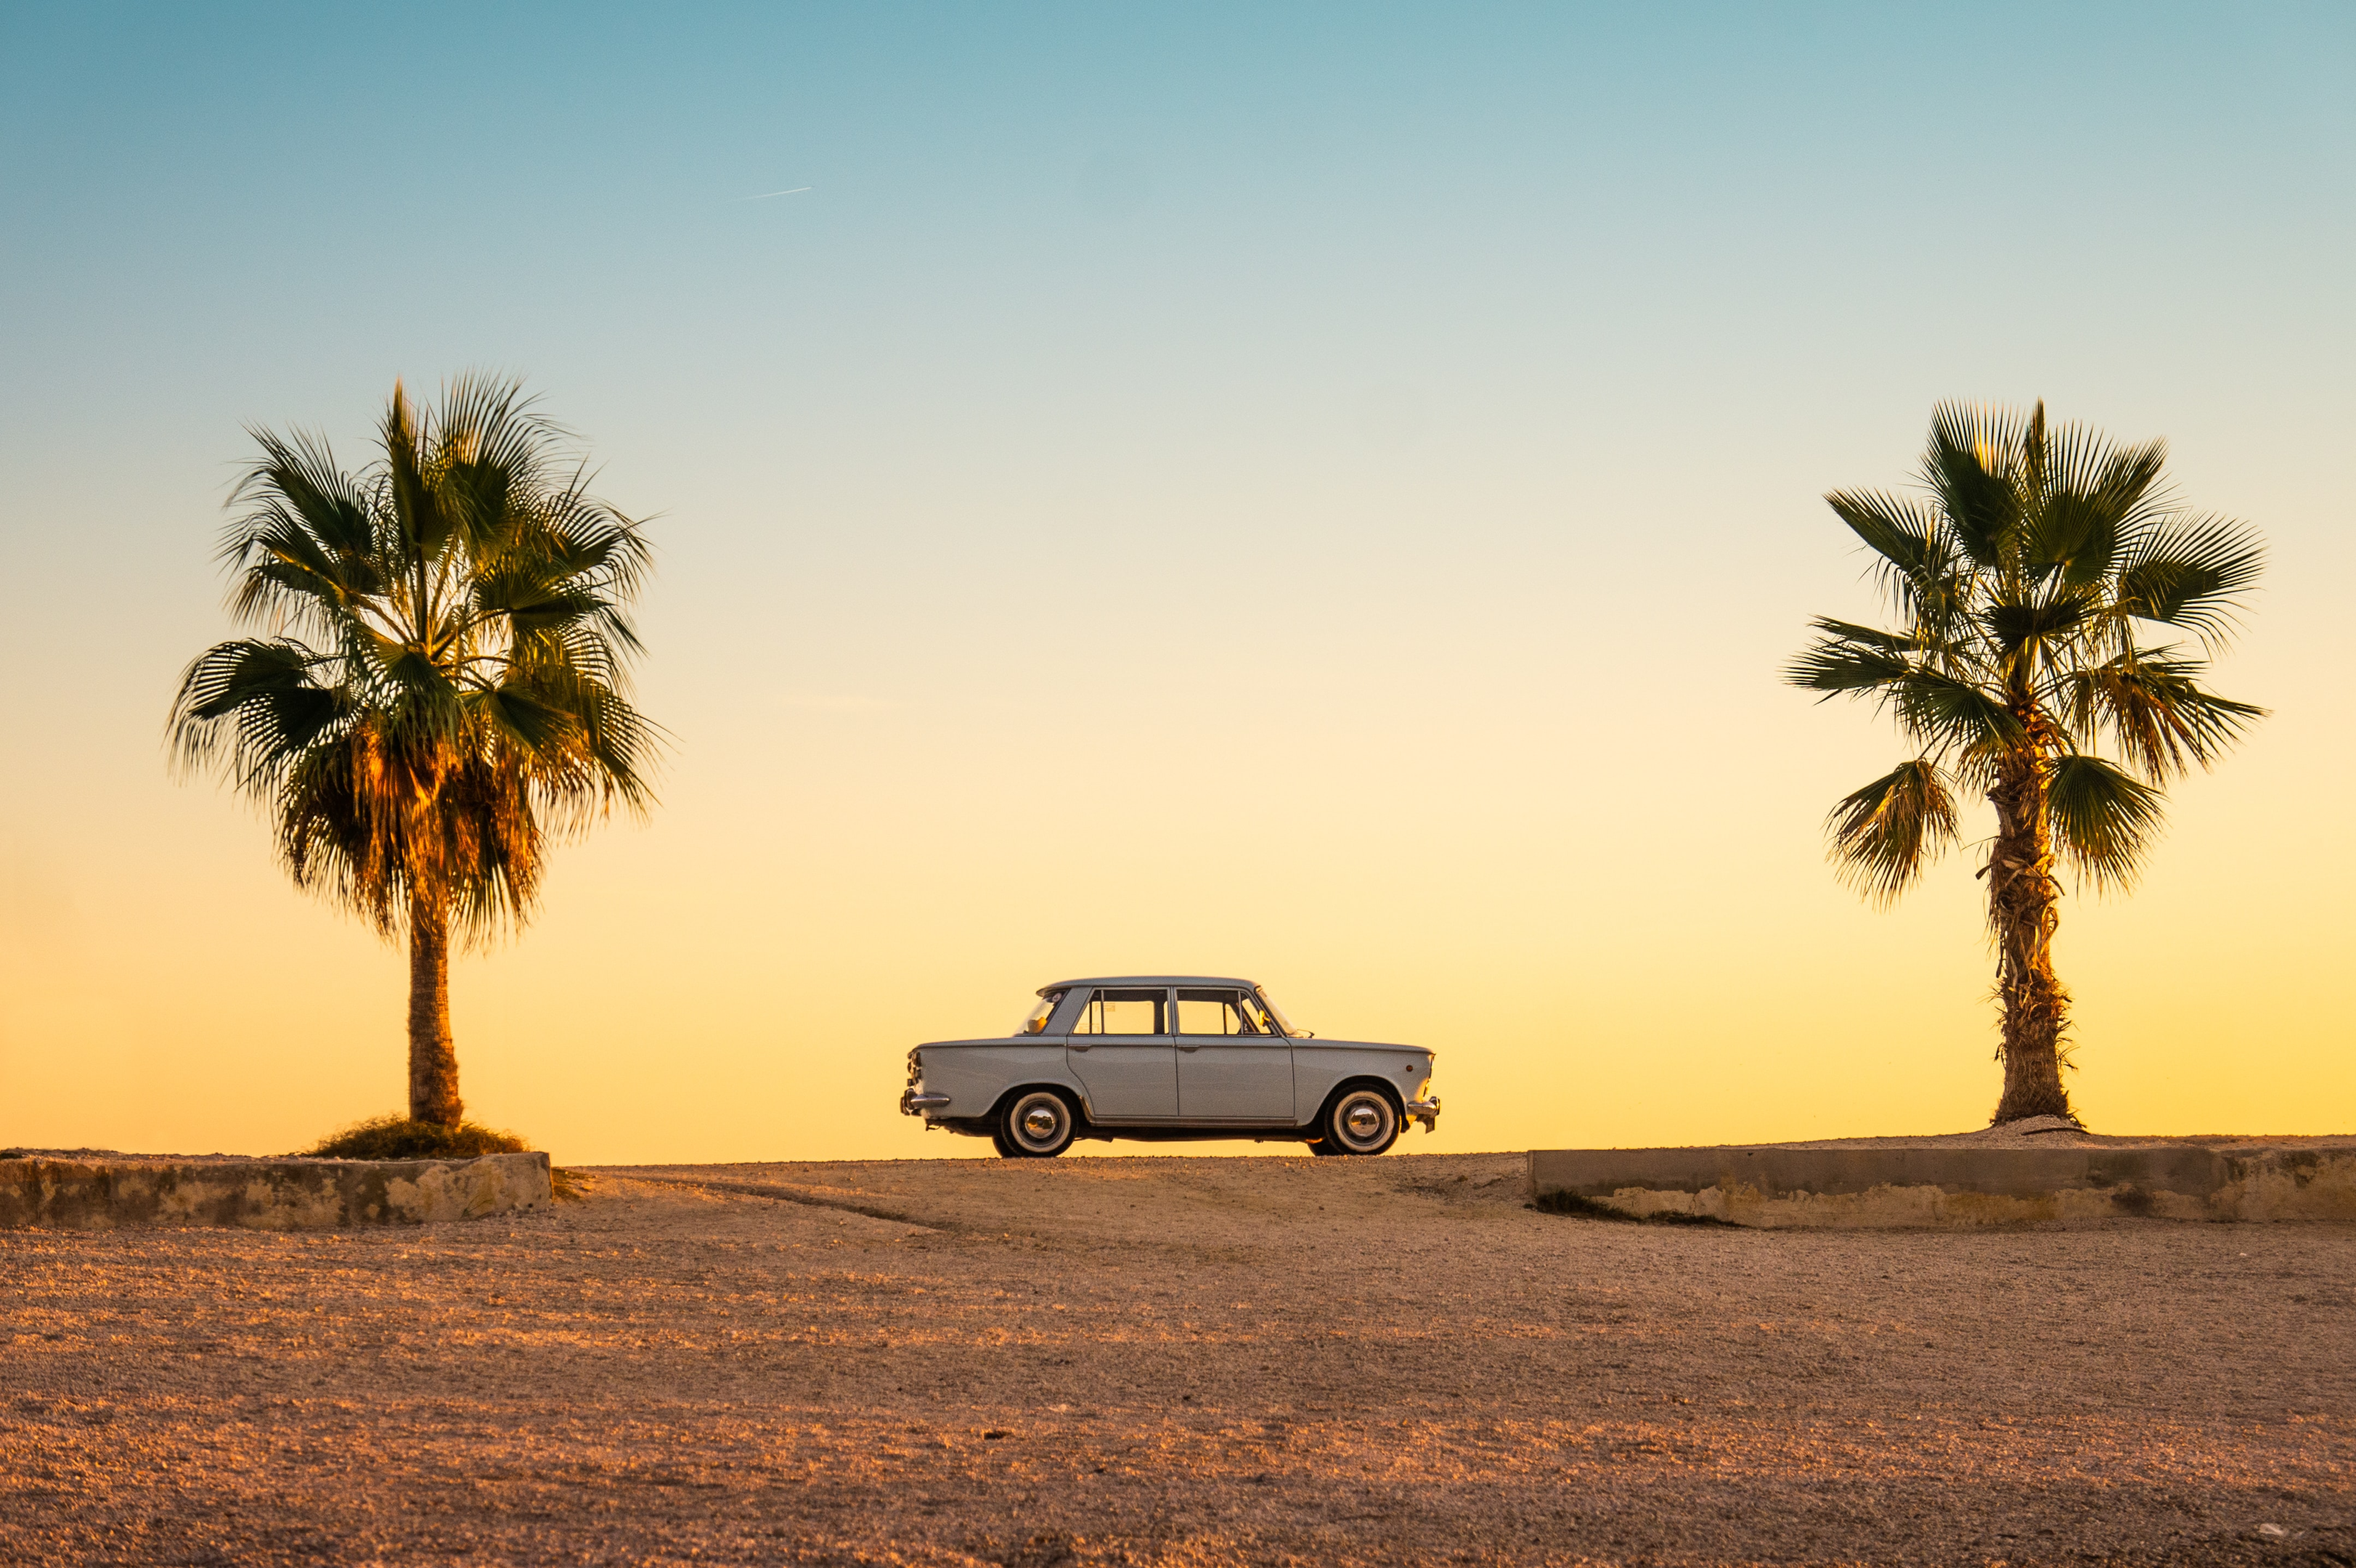 A classic 4 door sedan parked on a west coast sandy beach between two palm trees. The Summer is peak car shipping season for the car shipping industry.